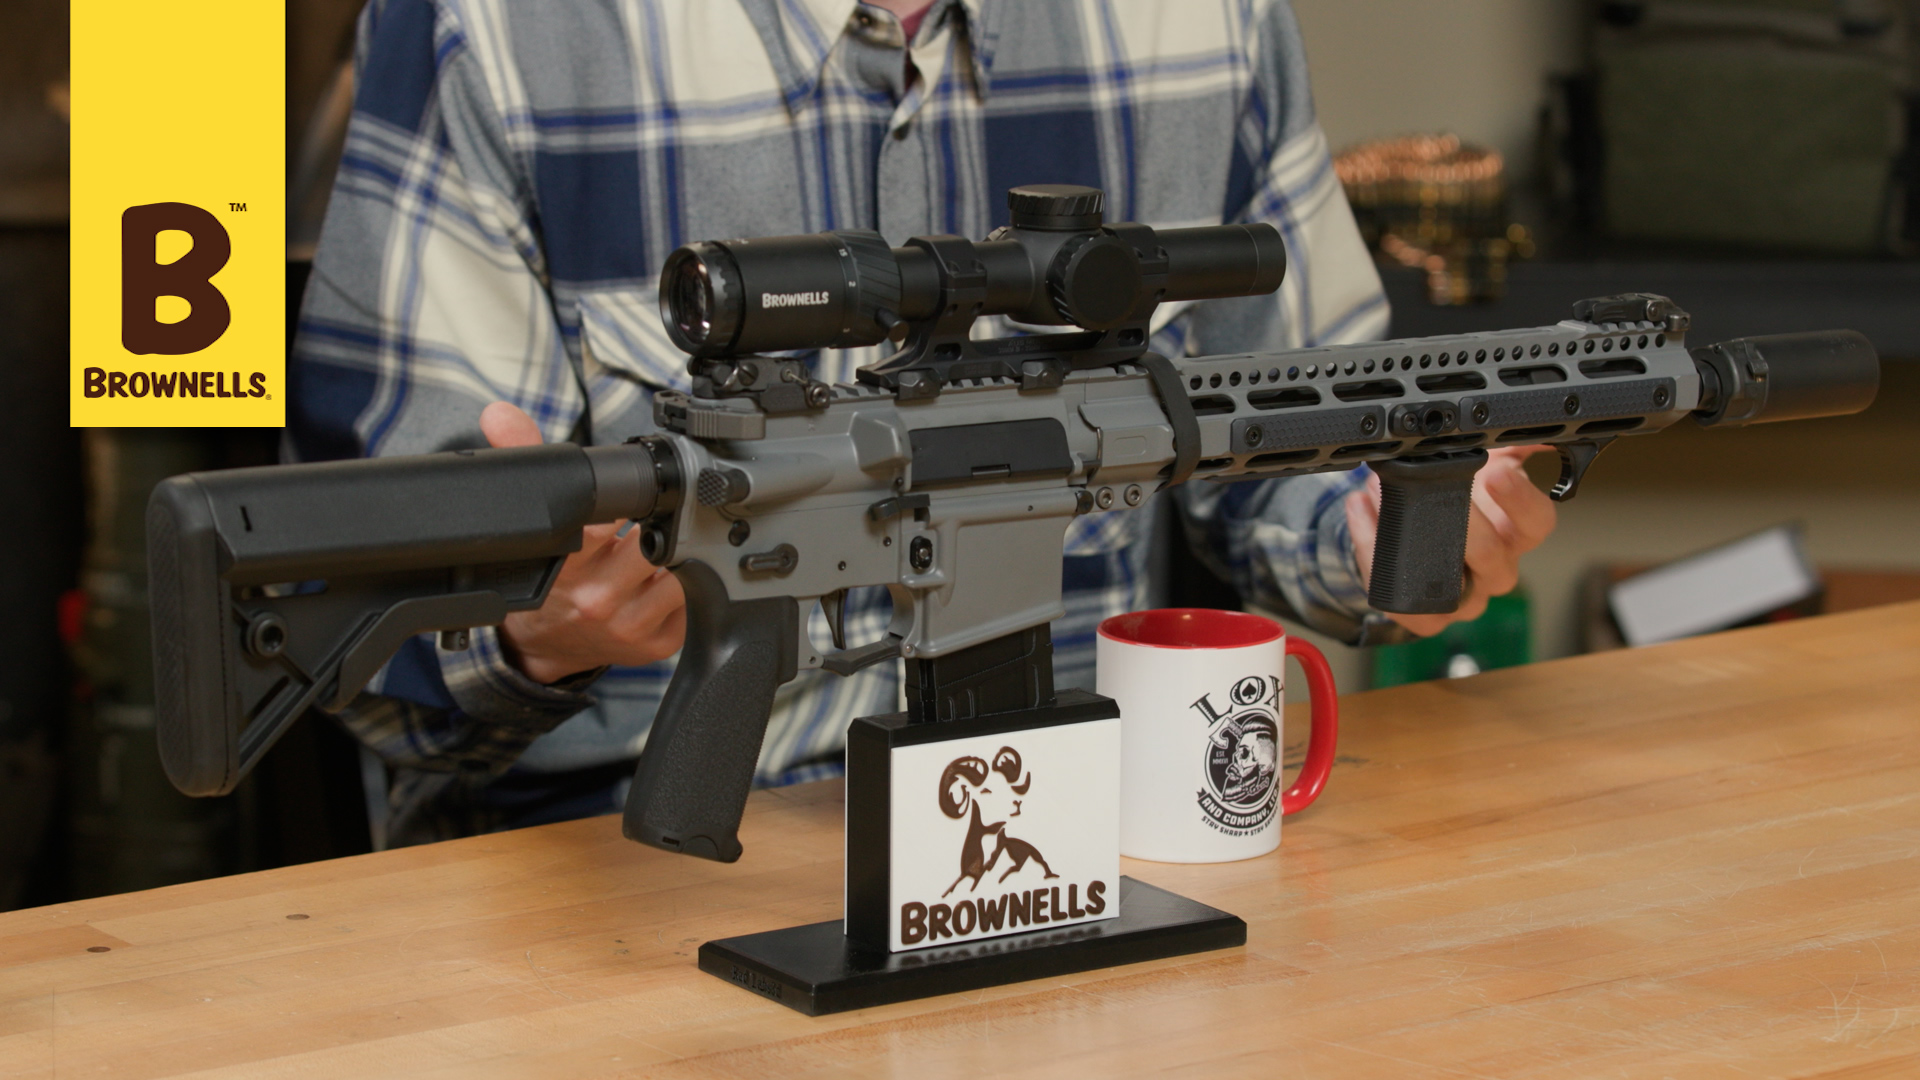 Smyth Busters: Are Stickers on AR-15s "Cringe"?